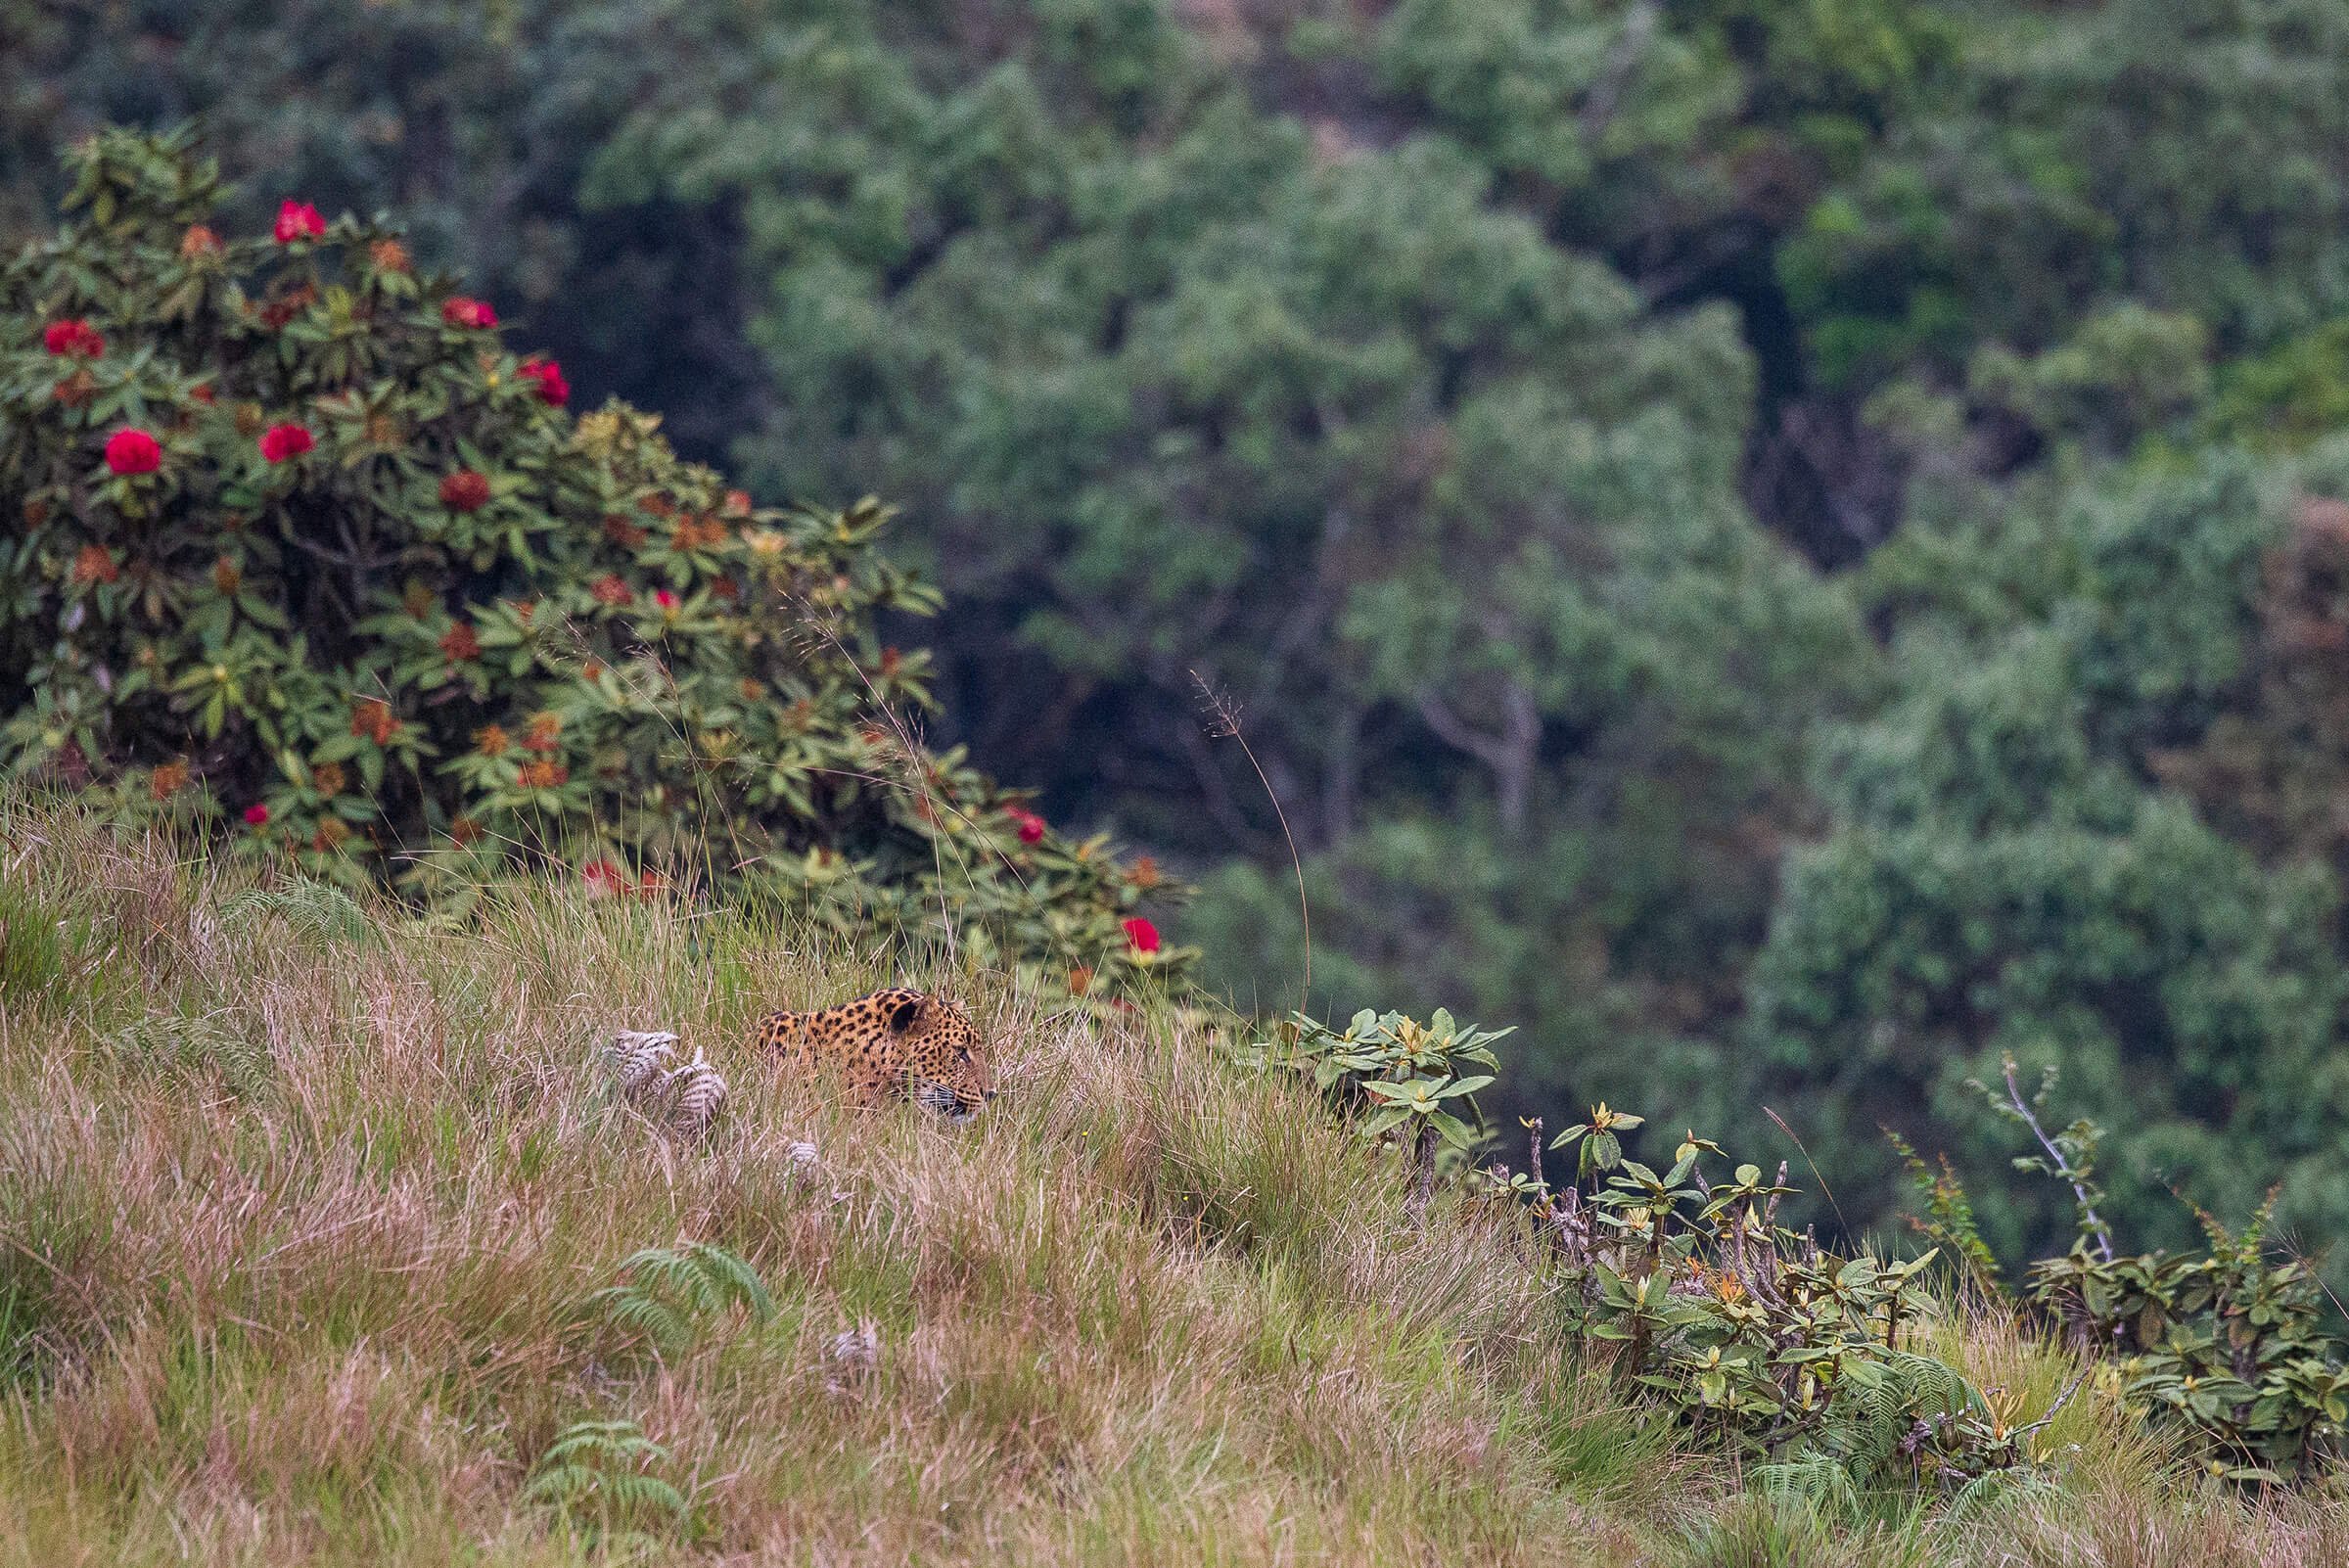 Horton Plains National Park, located in the central highlands of Sri Lanka